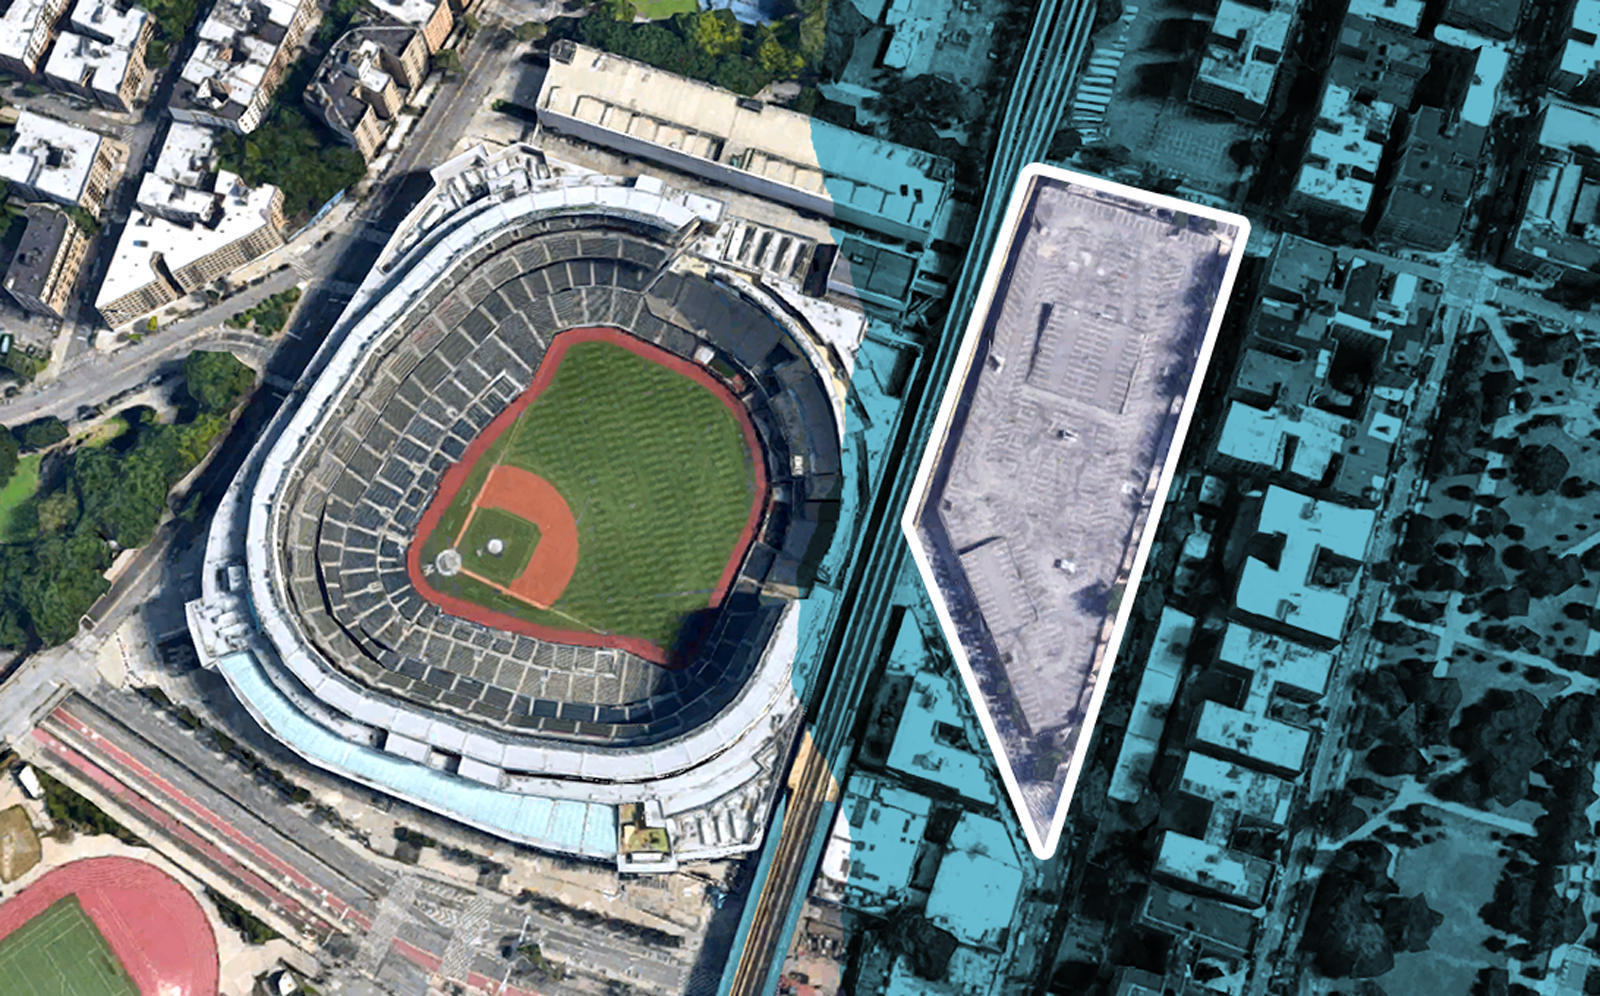 An aerial view of Yankees Stadium and the parking lot at 951 River Avenue in the Bronx (Google Maps)